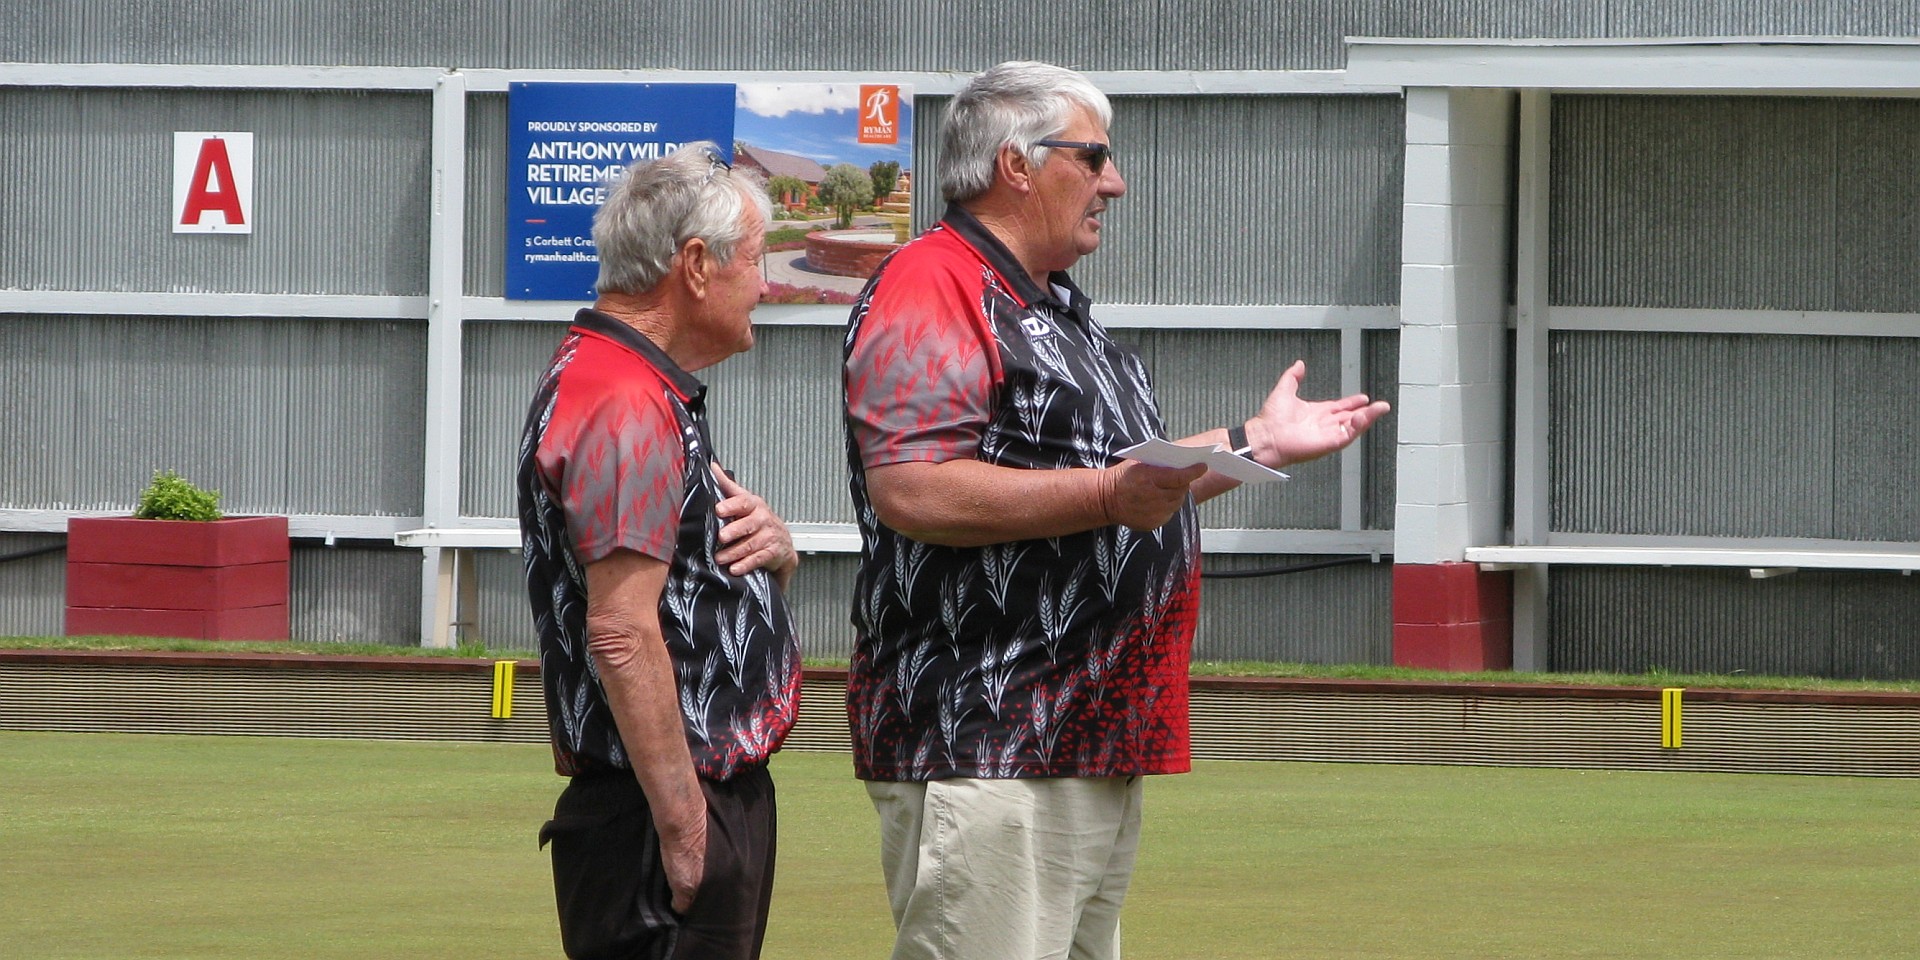 Paul lee and Mark Sheehan welcome the bowlers to the Open Wednesday Fours Tournament - 17 November 2021